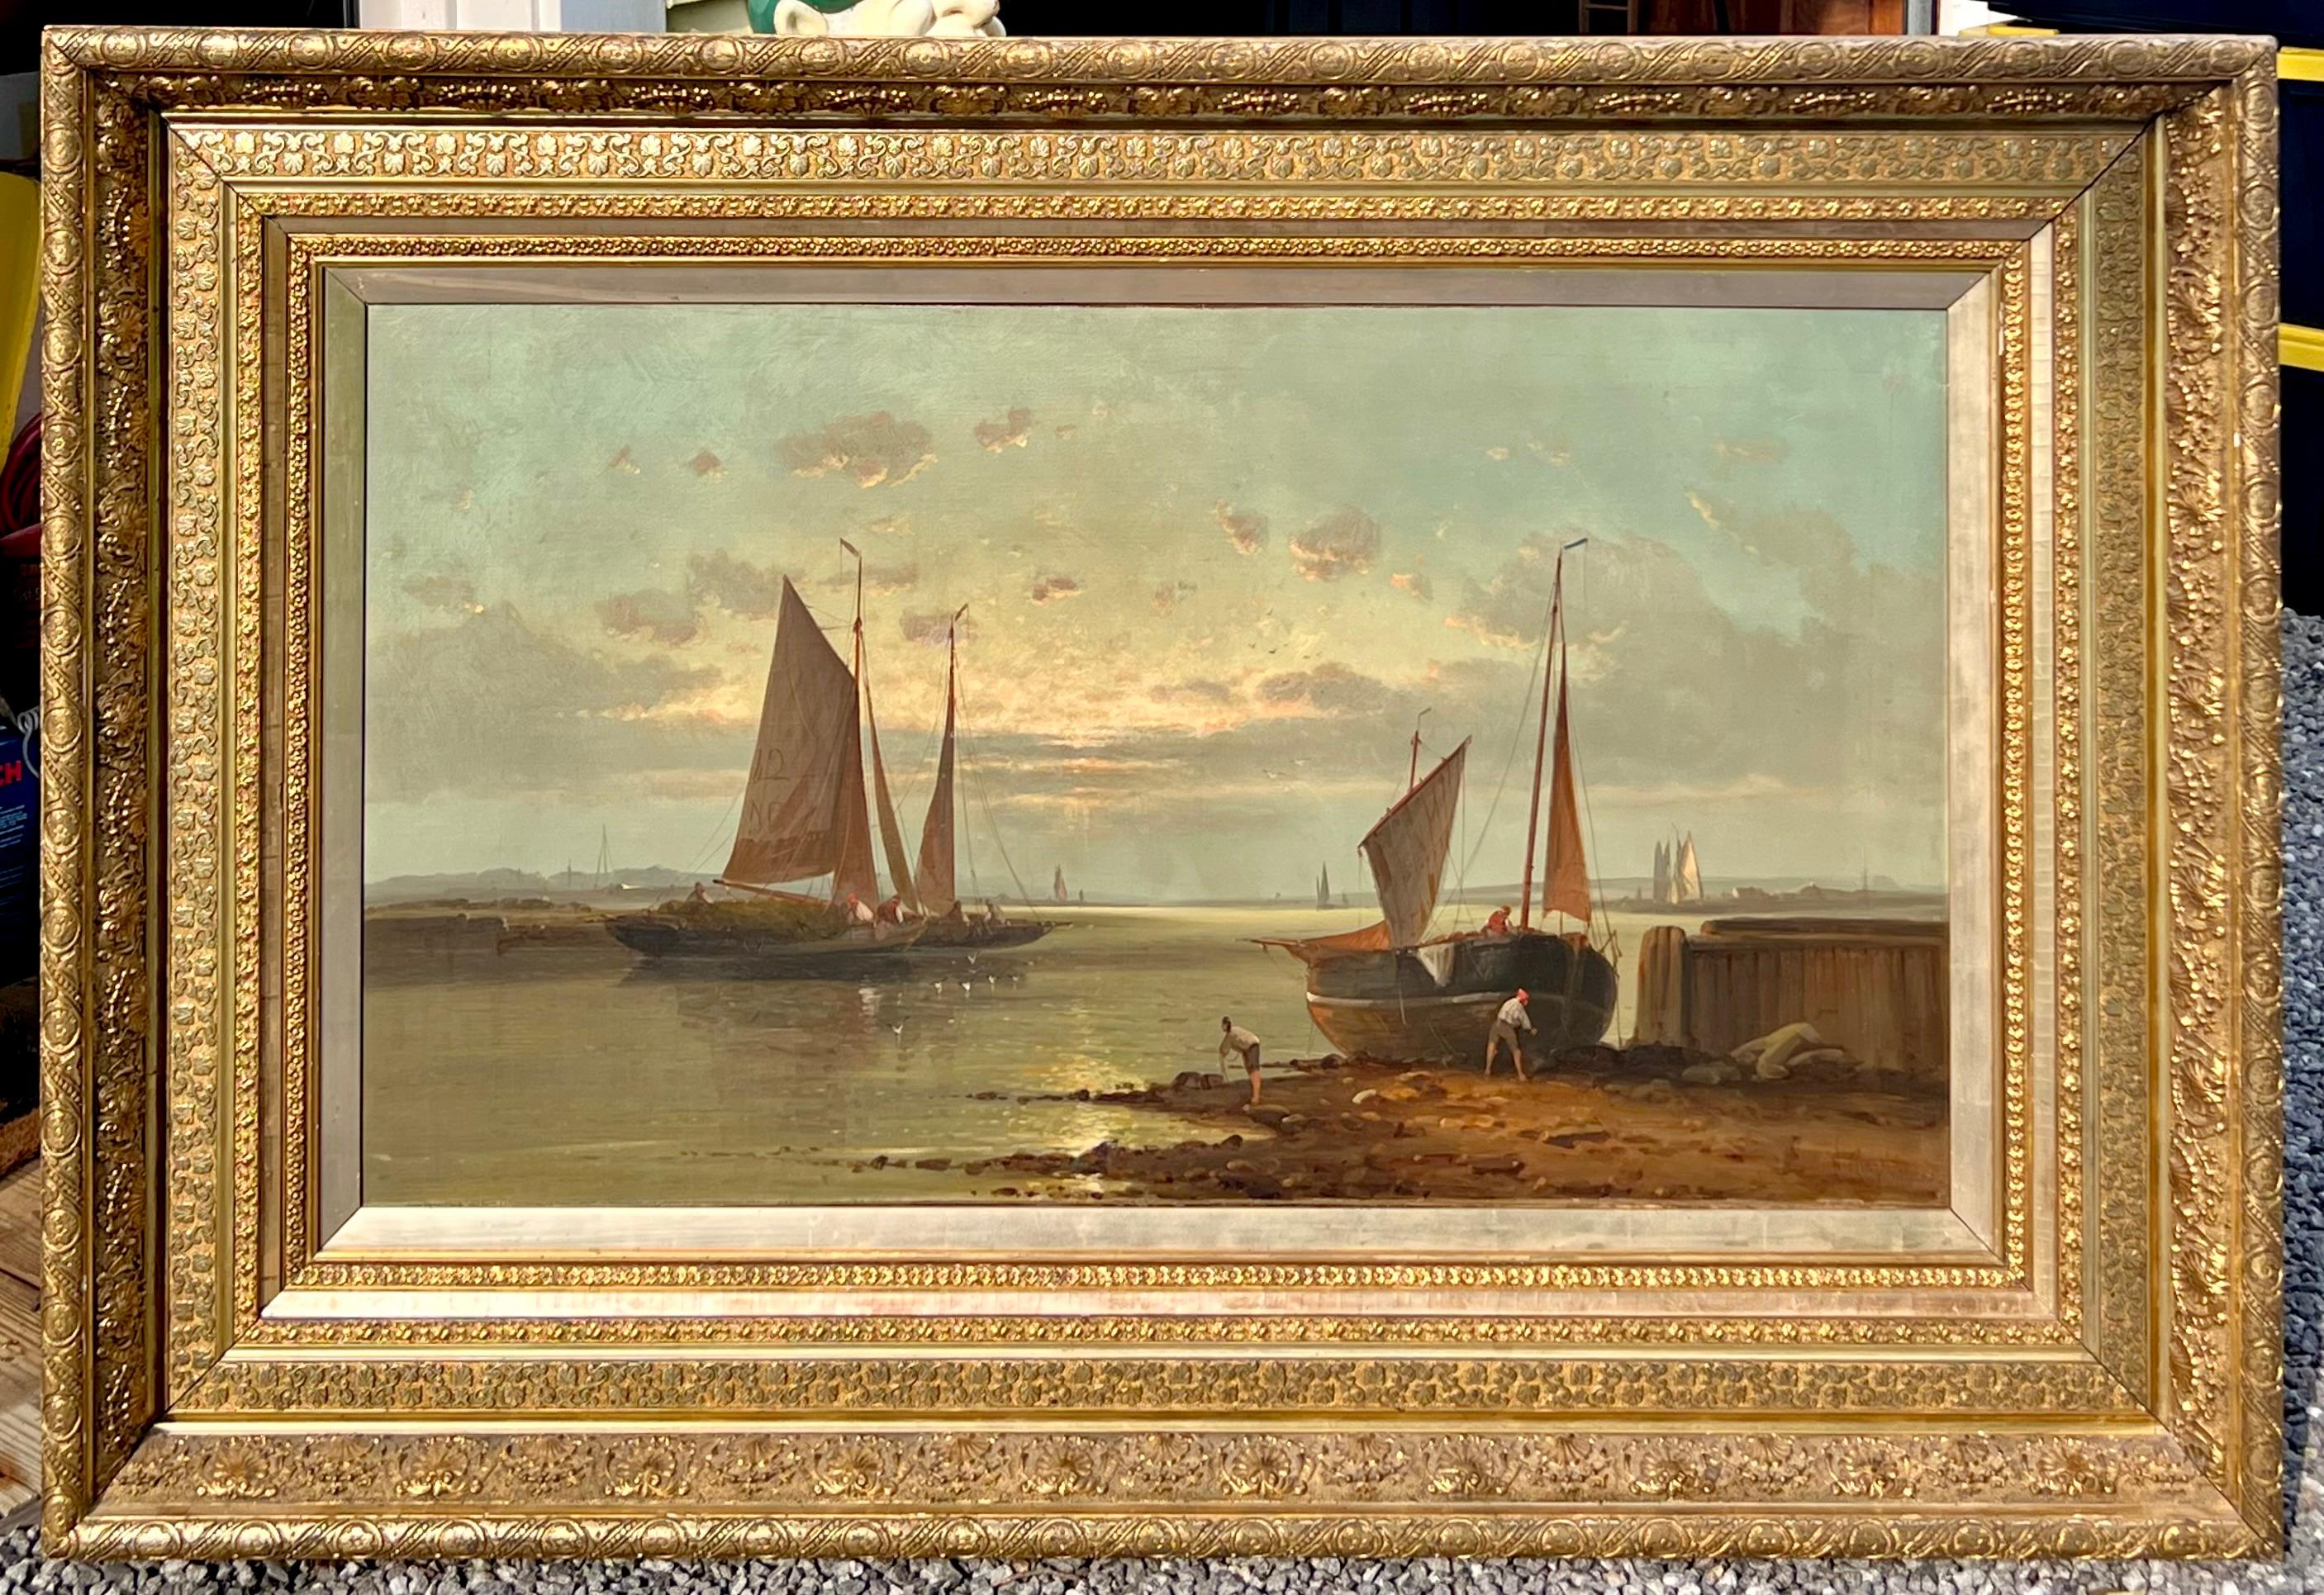 Well executed marine scene oil on canvas signed in the lower right corner 'N Ringold', no doubt a talented artist but not one that I could locate a background on. The painting is an oil on canvas and presented in a magnificent period and probably